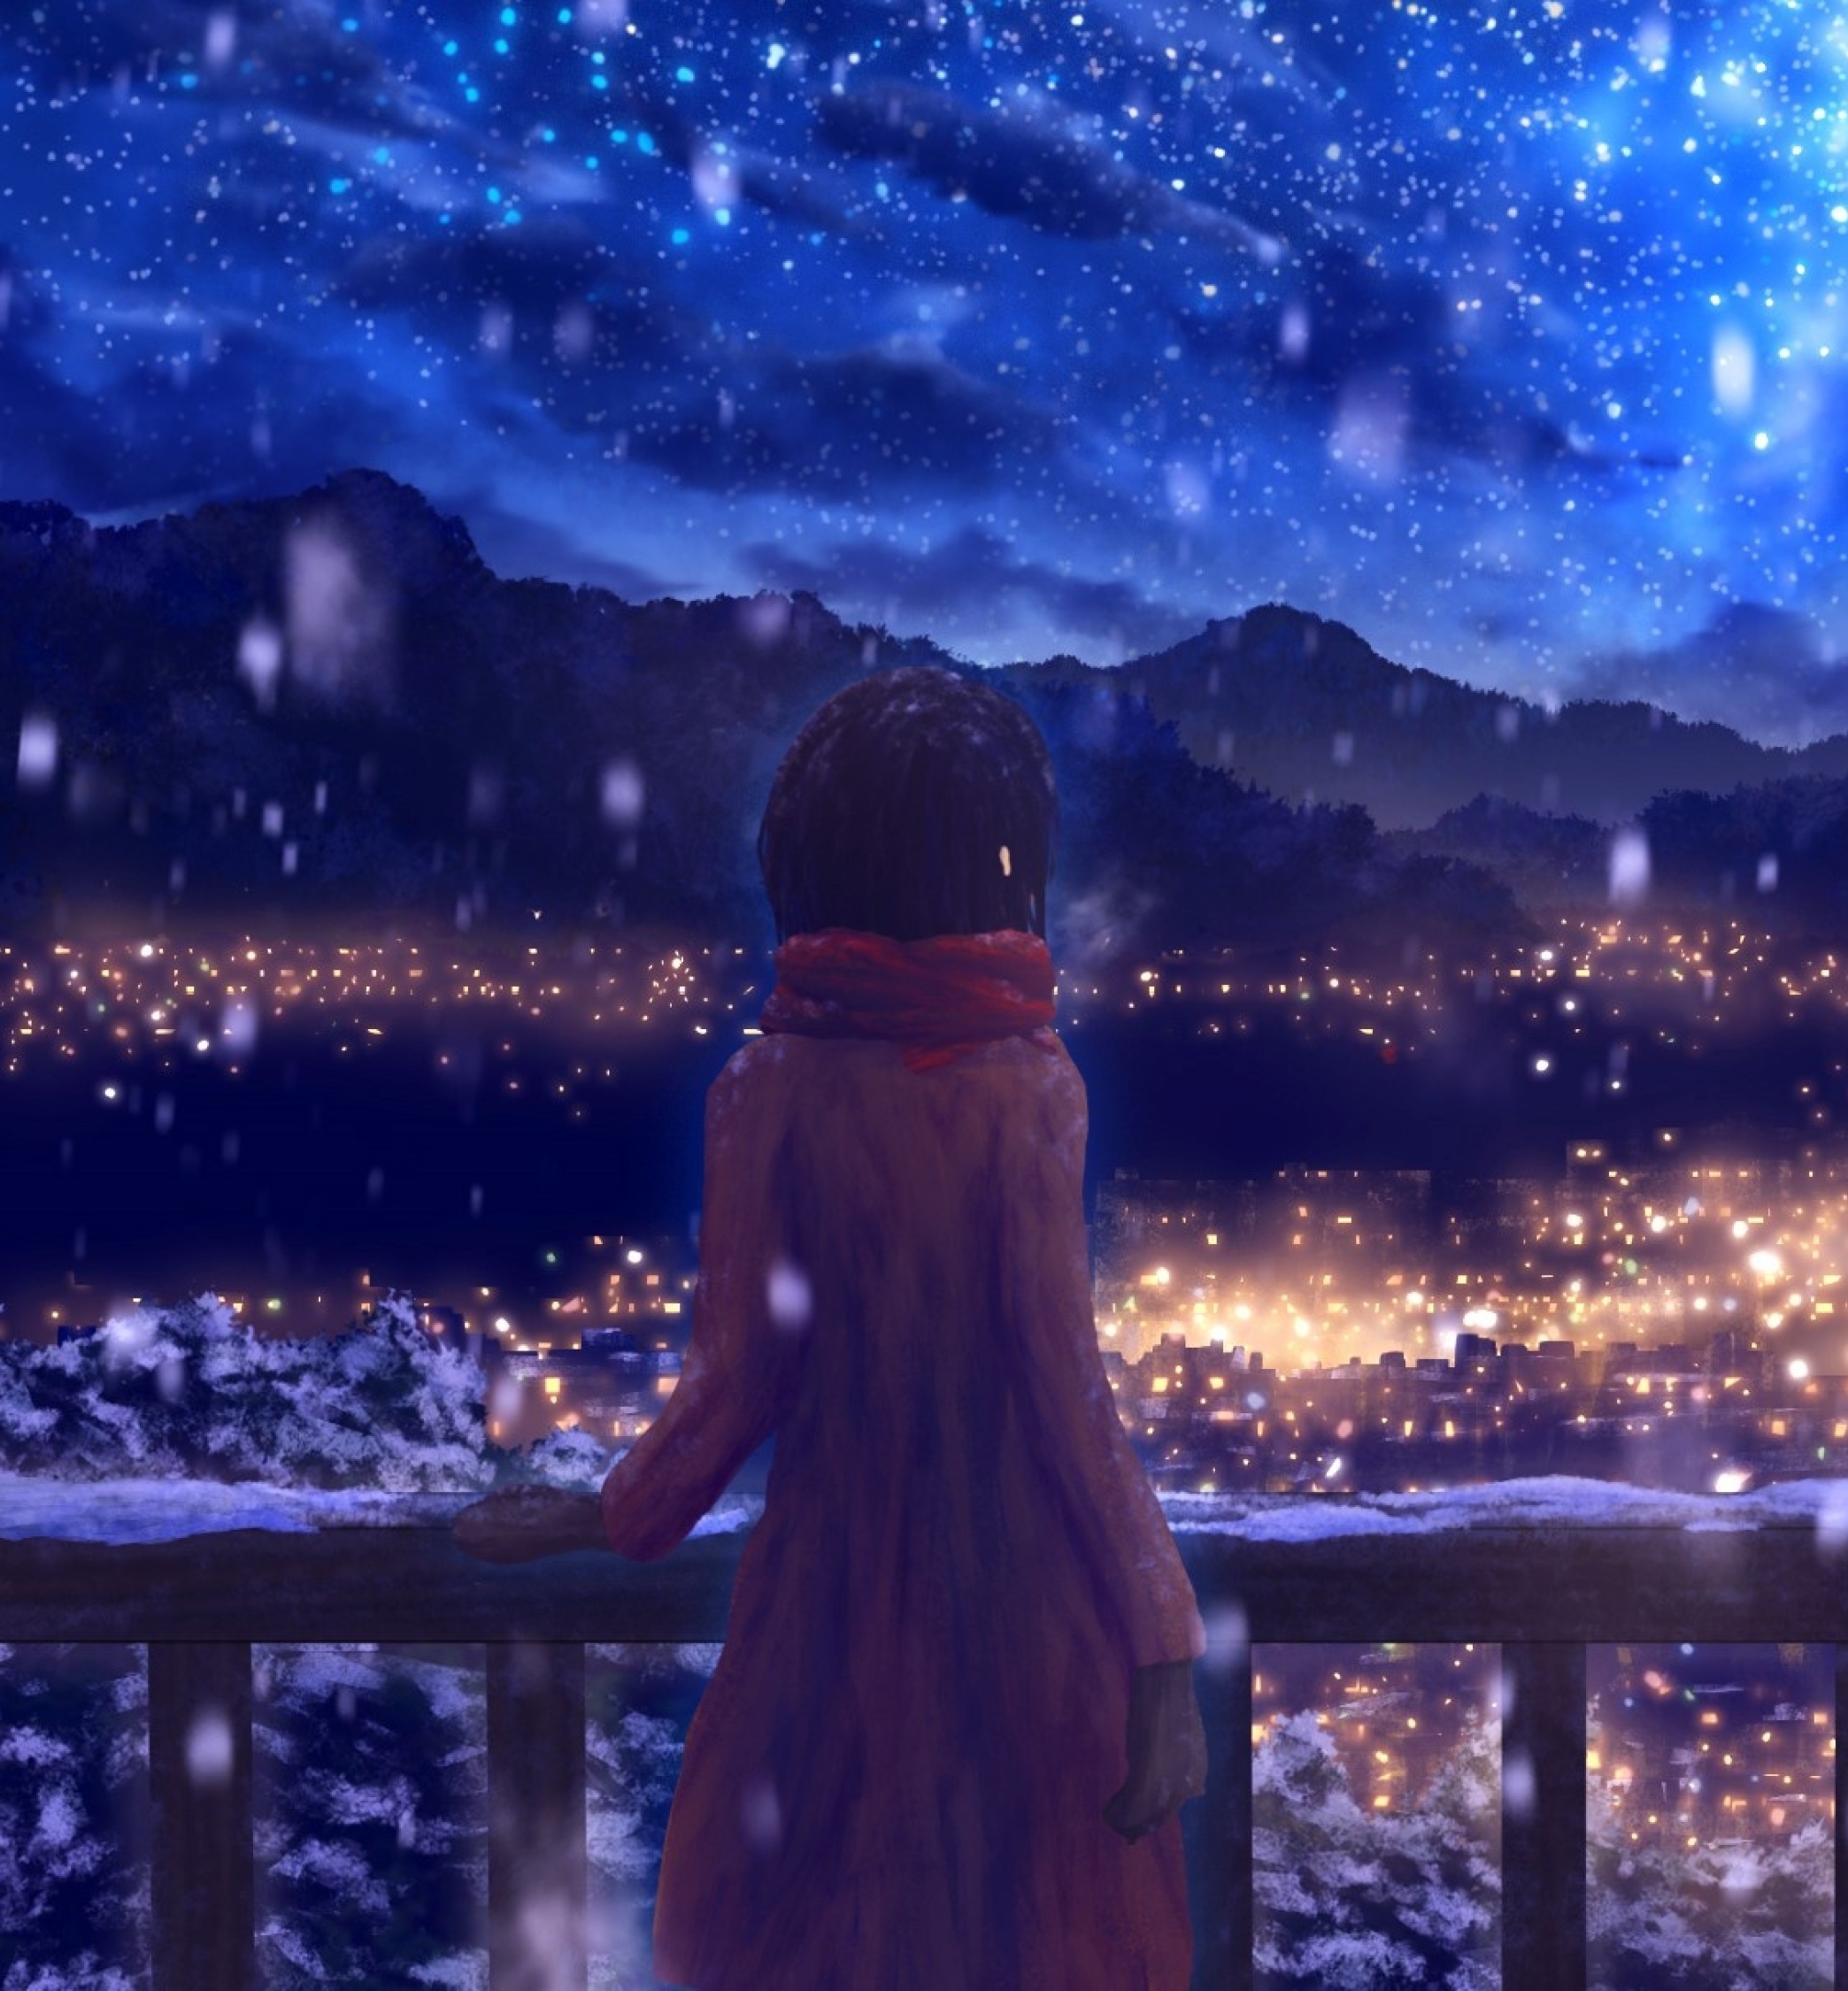 Anime Girl Lying On The Roof Watching The Aurora In The Snow Live Wallpaper   MoeWalls